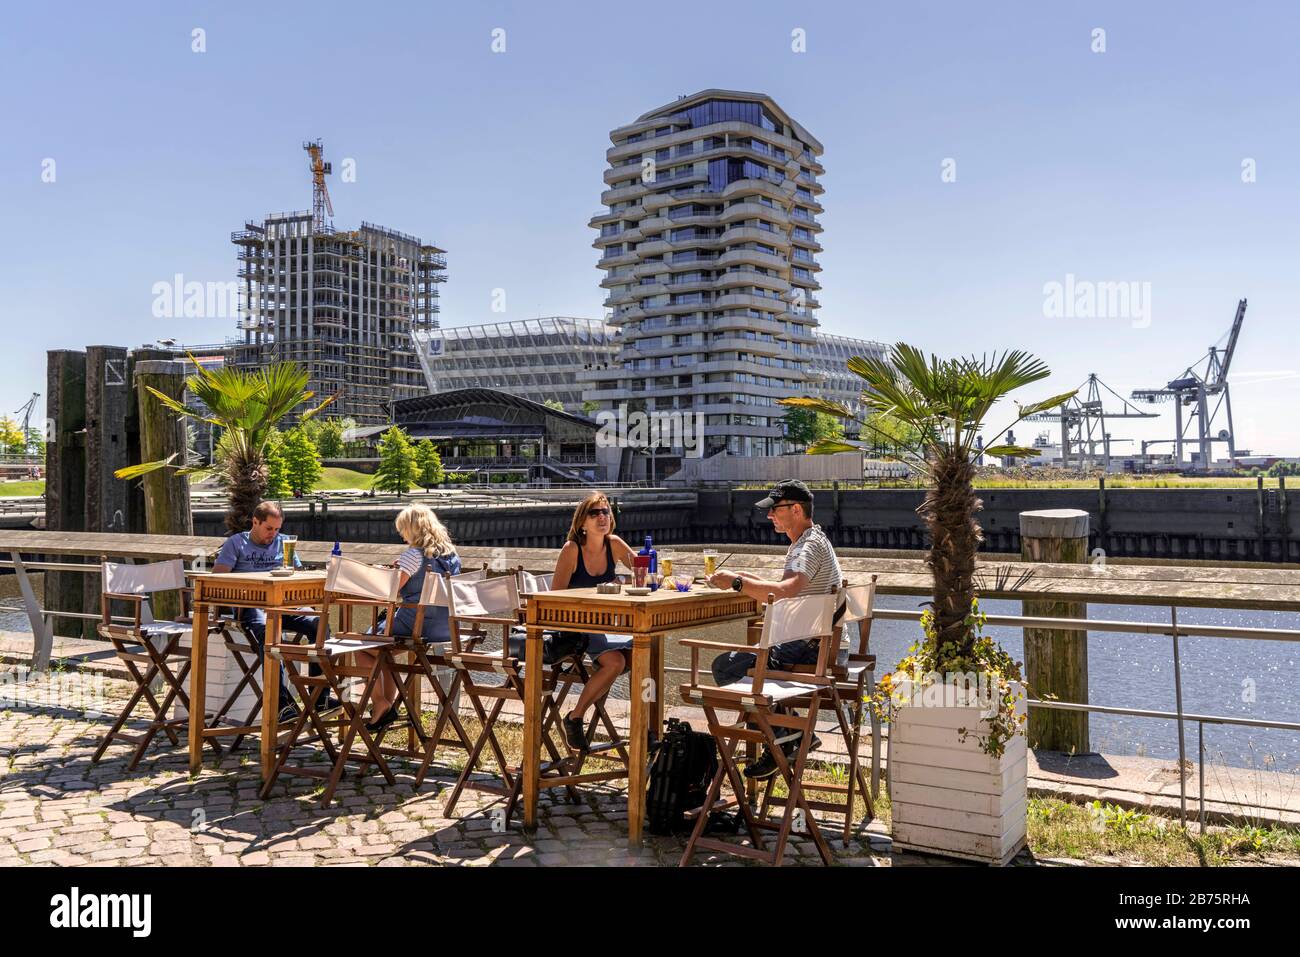 Germany, Hamburg, 09.07.2017. Gastronomy in the HafenCity district on 09.07.2017. HafenCity is located in Hamburg-Mitte, was founded in 2008 and is the largest inner-city urban development project in Europe. [automated translation] Stock Photo